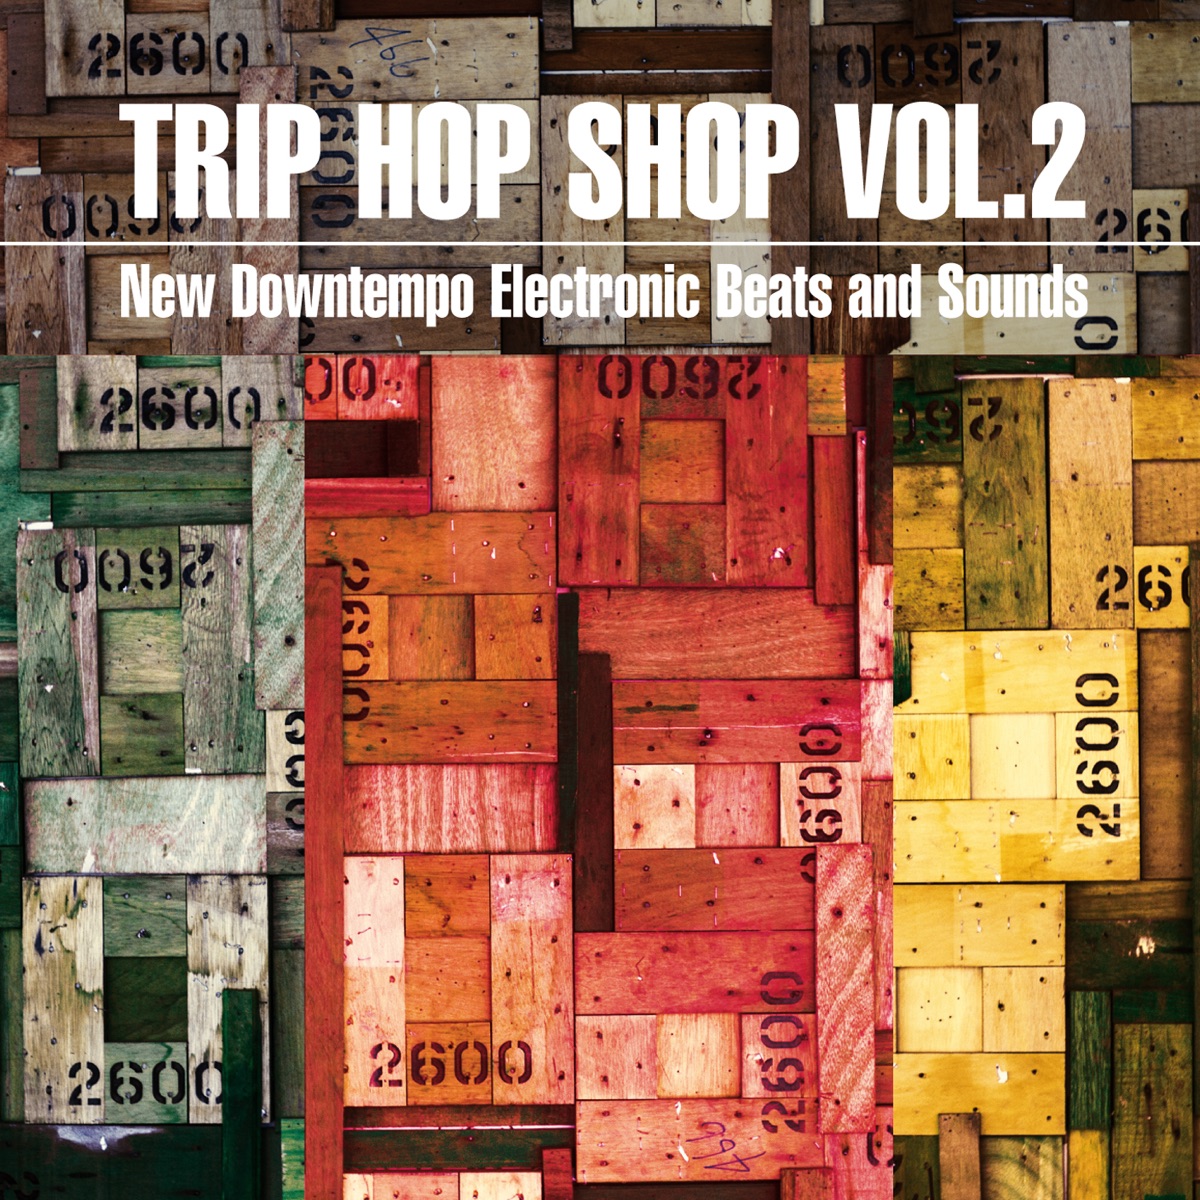 Trip Hop Shop, Vol. 2 (New Downtempo Electronic Beats and Sounds) by  Various Artists on Apple Music